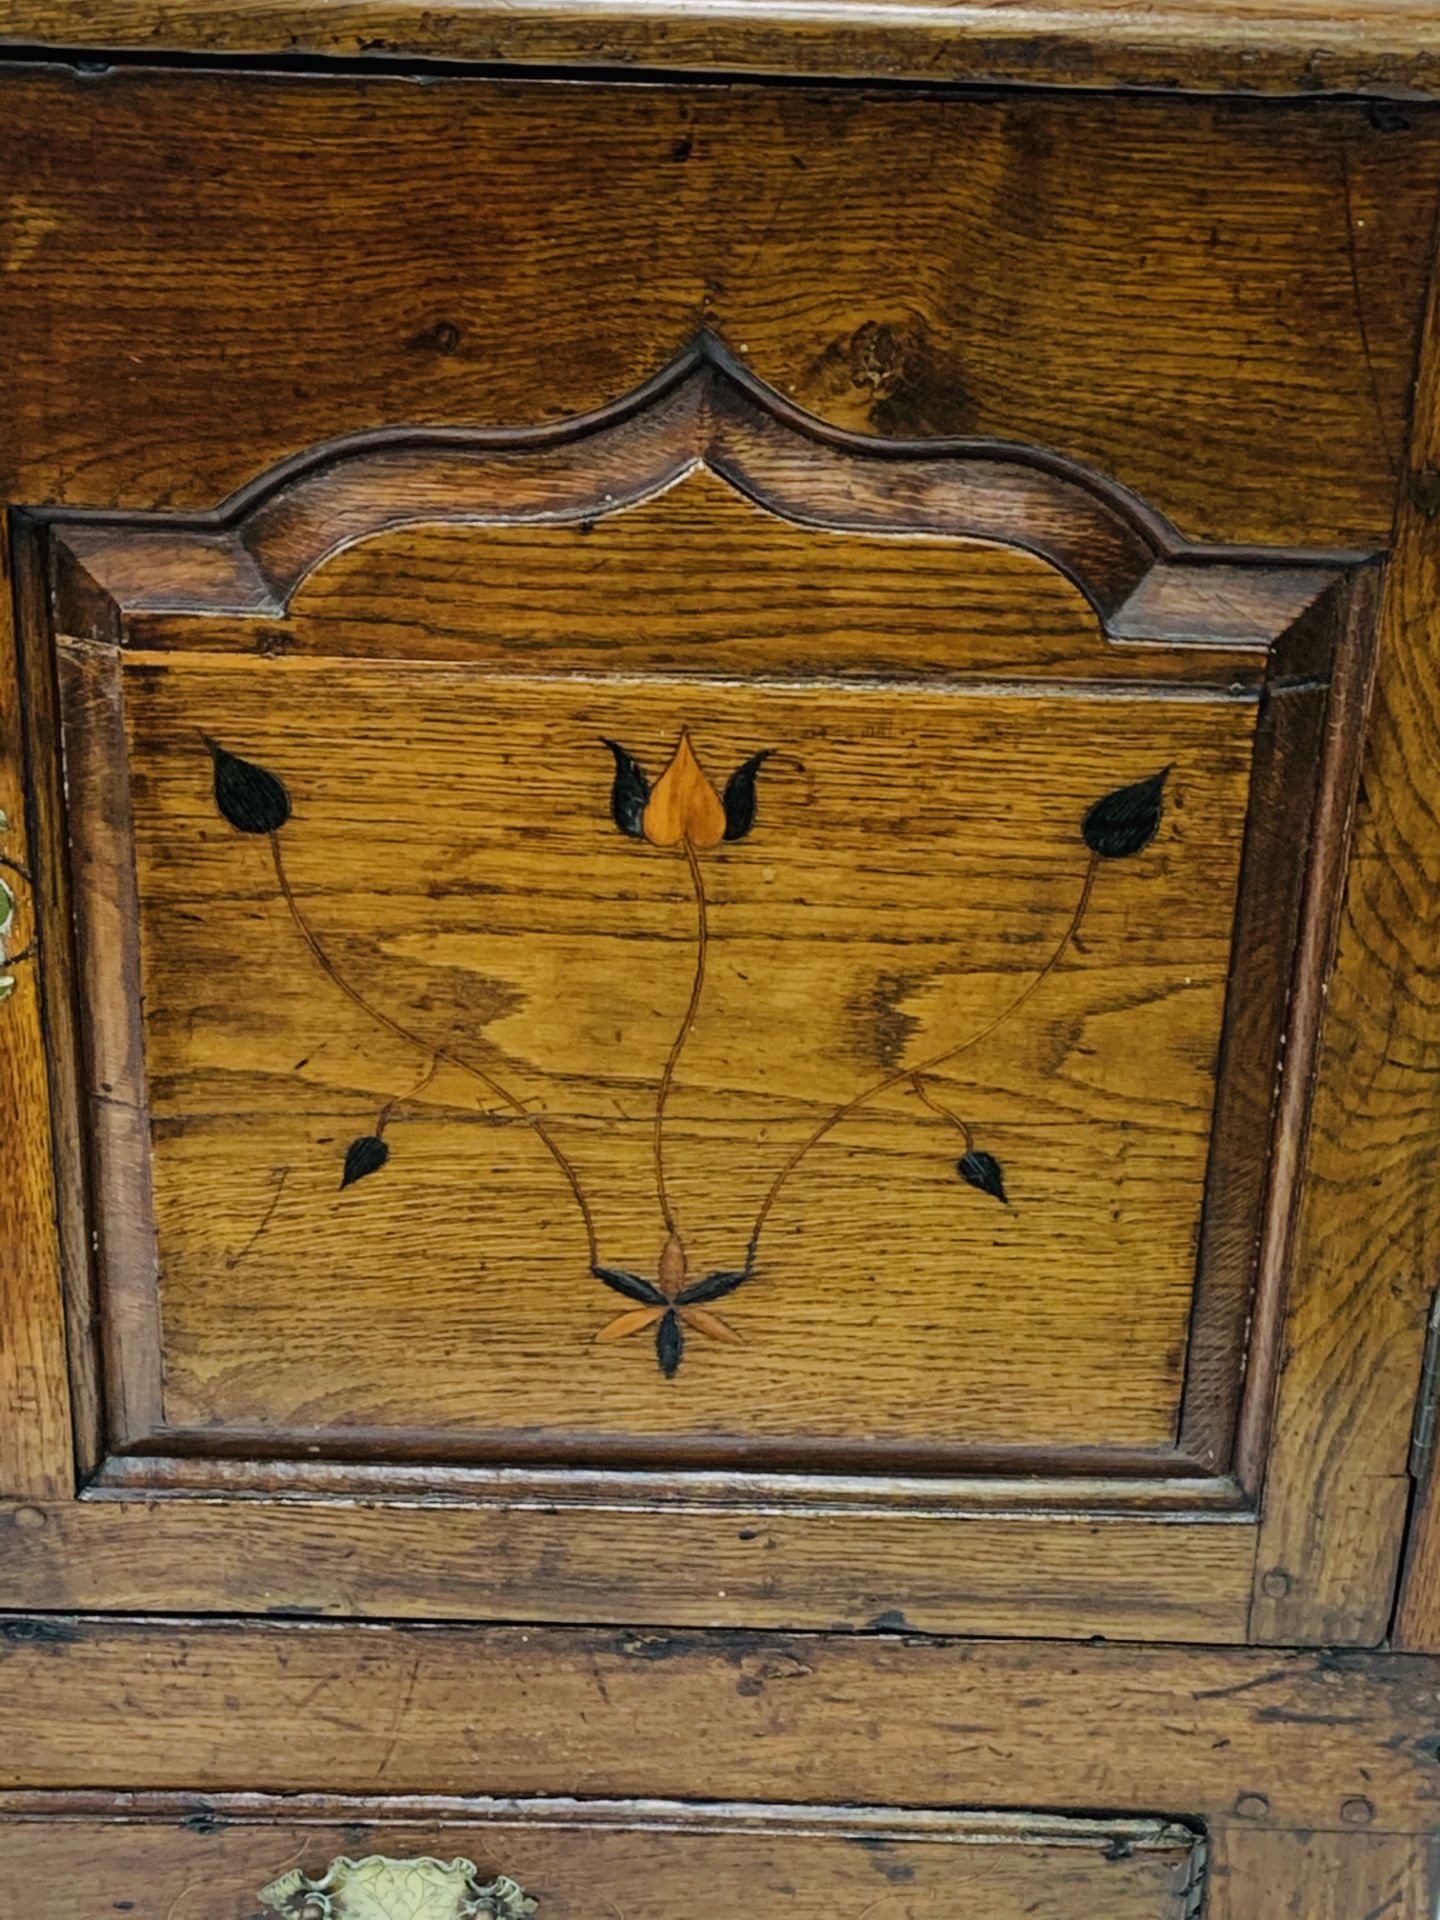 Oak sideboard with decorative inlaid door fronts and panel - Image 2 of 8